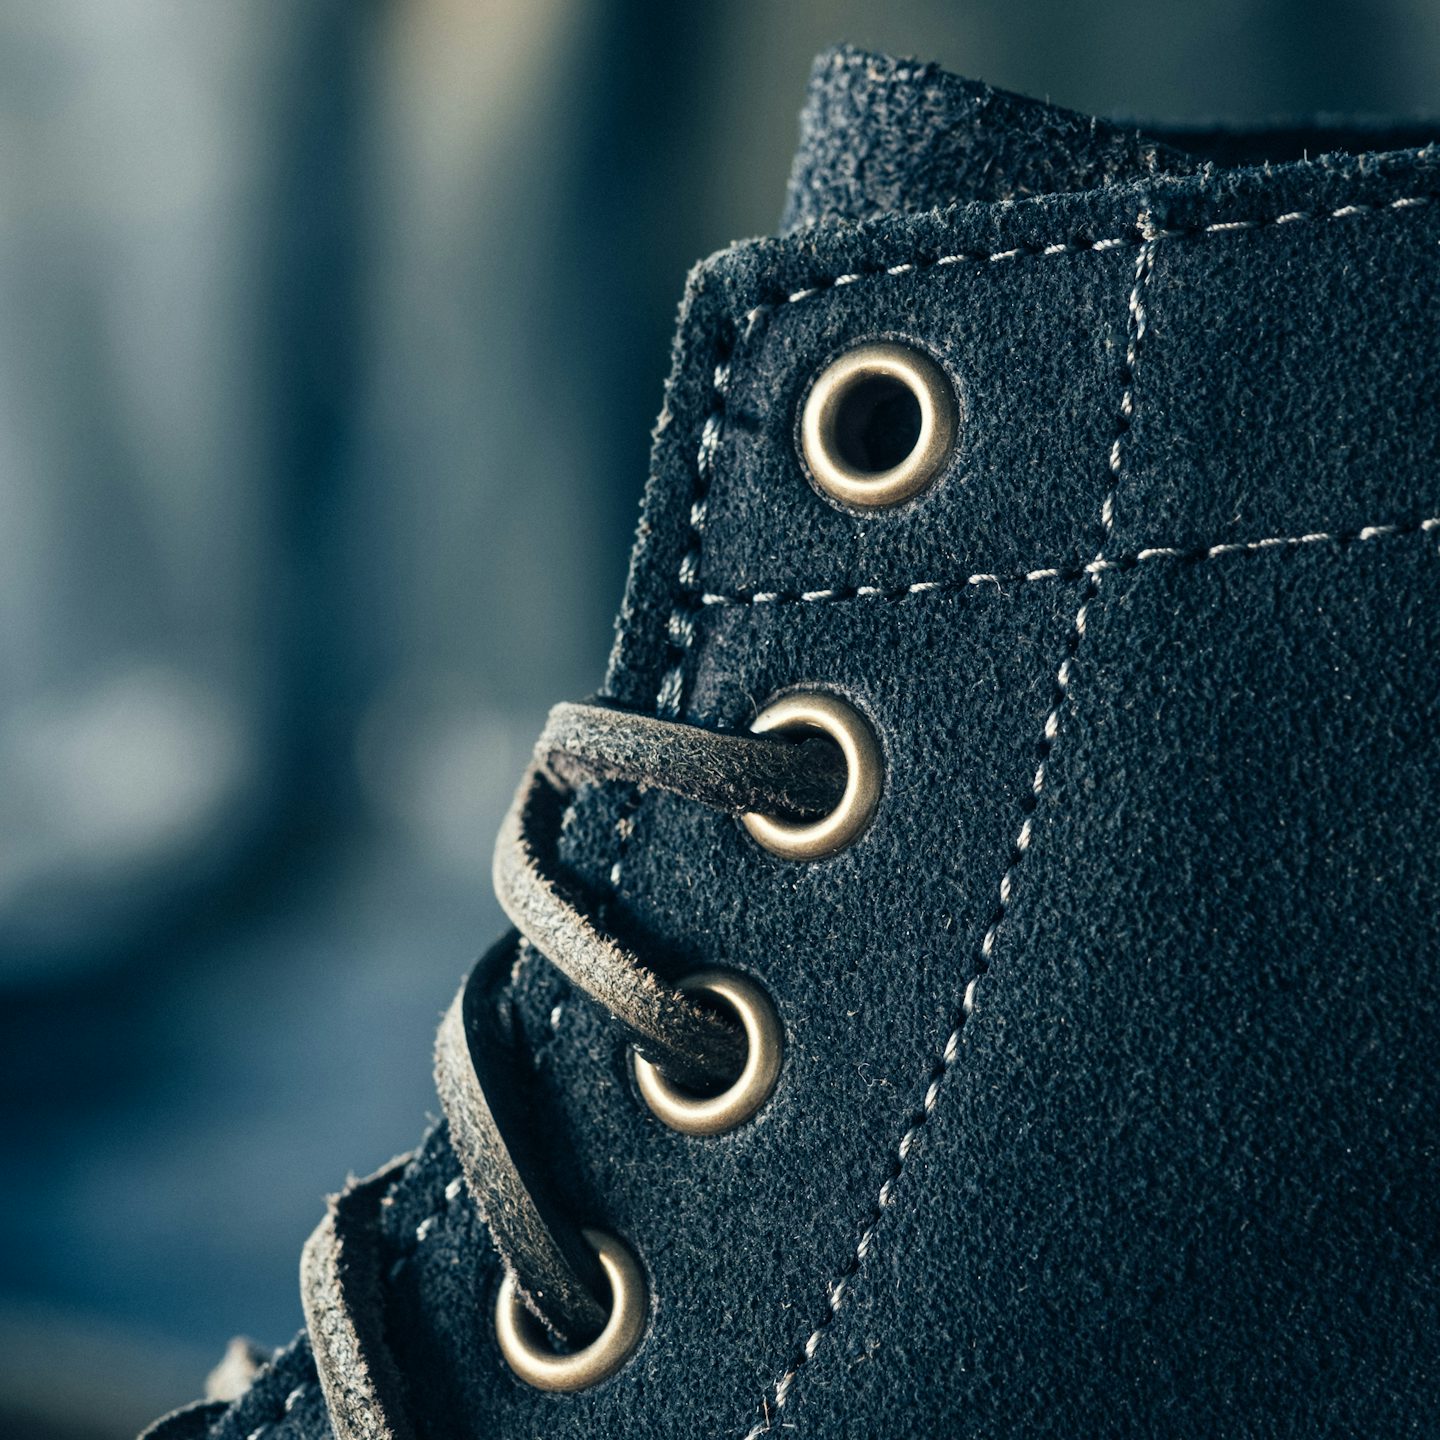 Natural Indigo Chromexcel Roughout Trench Boot - Detail Image One